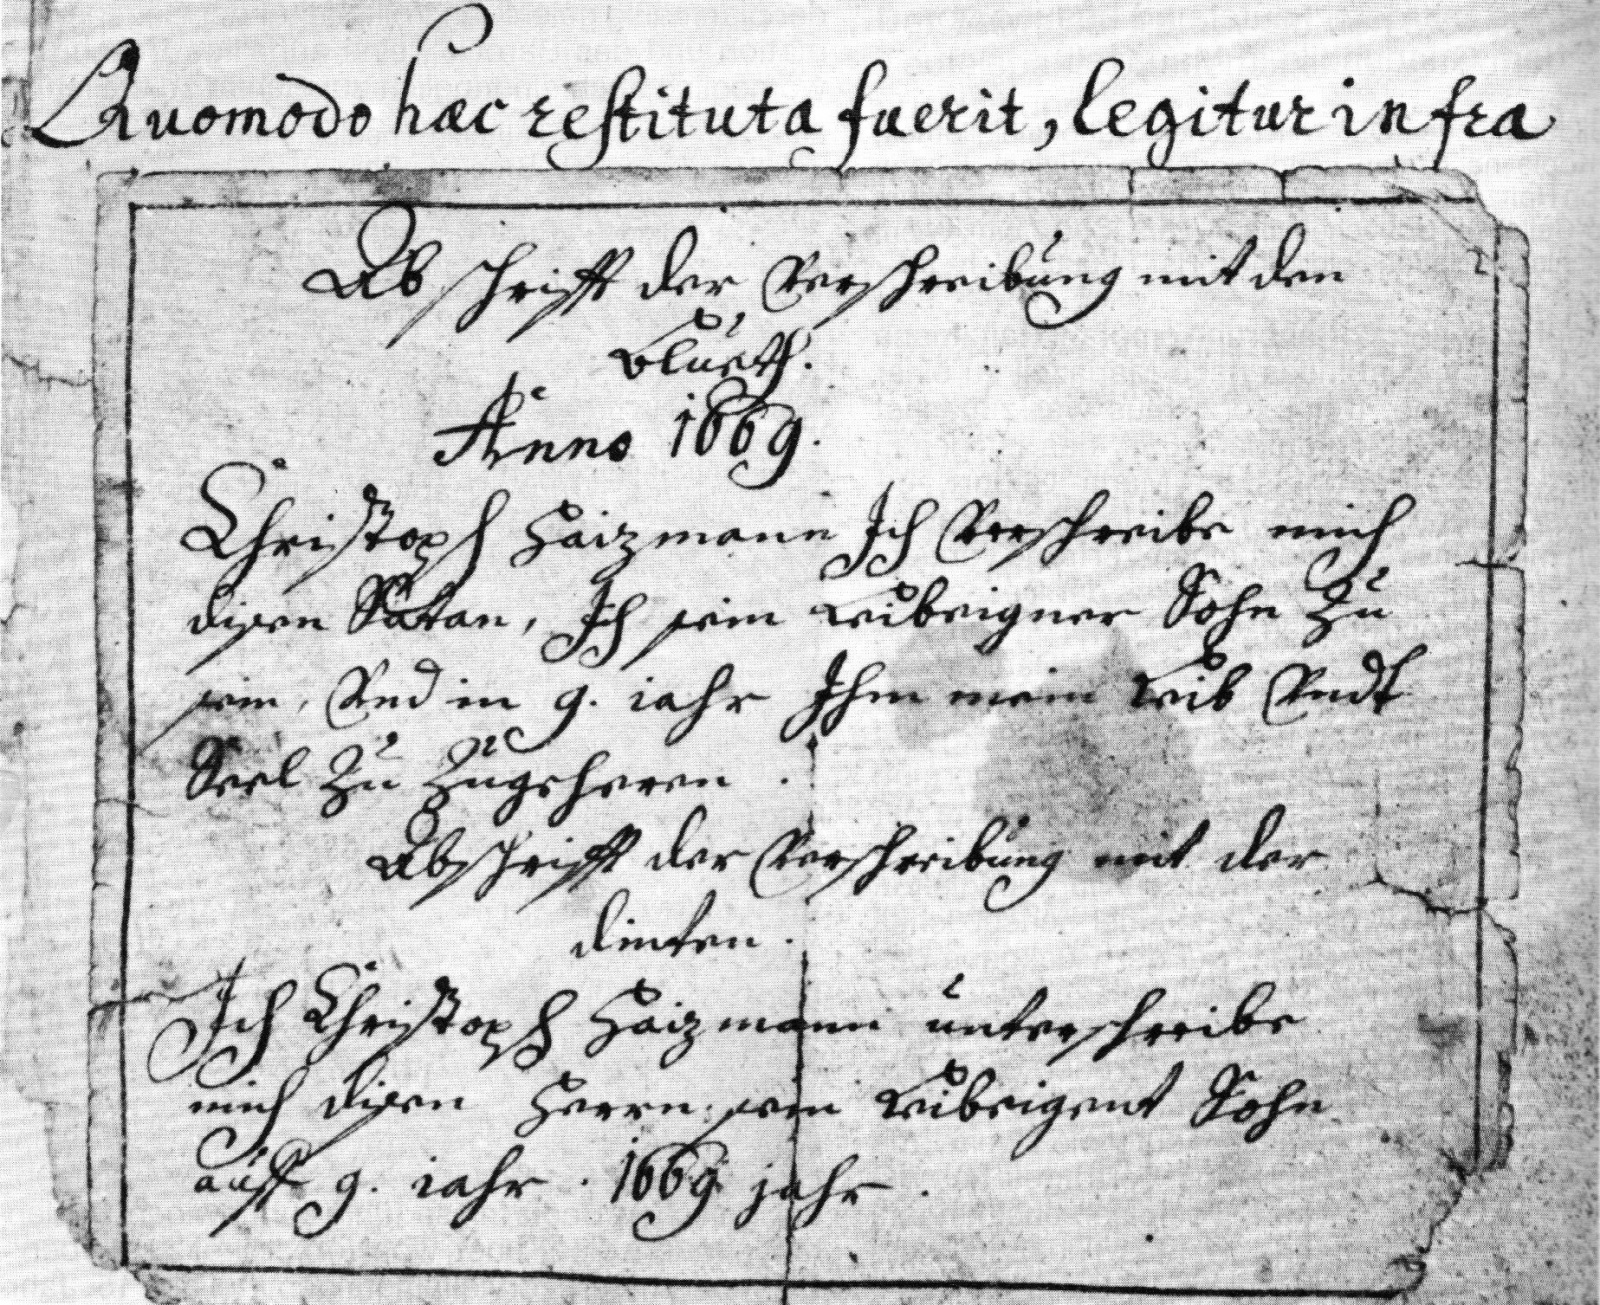 Copy of a written deal by Christoph Haizmann from 1669.